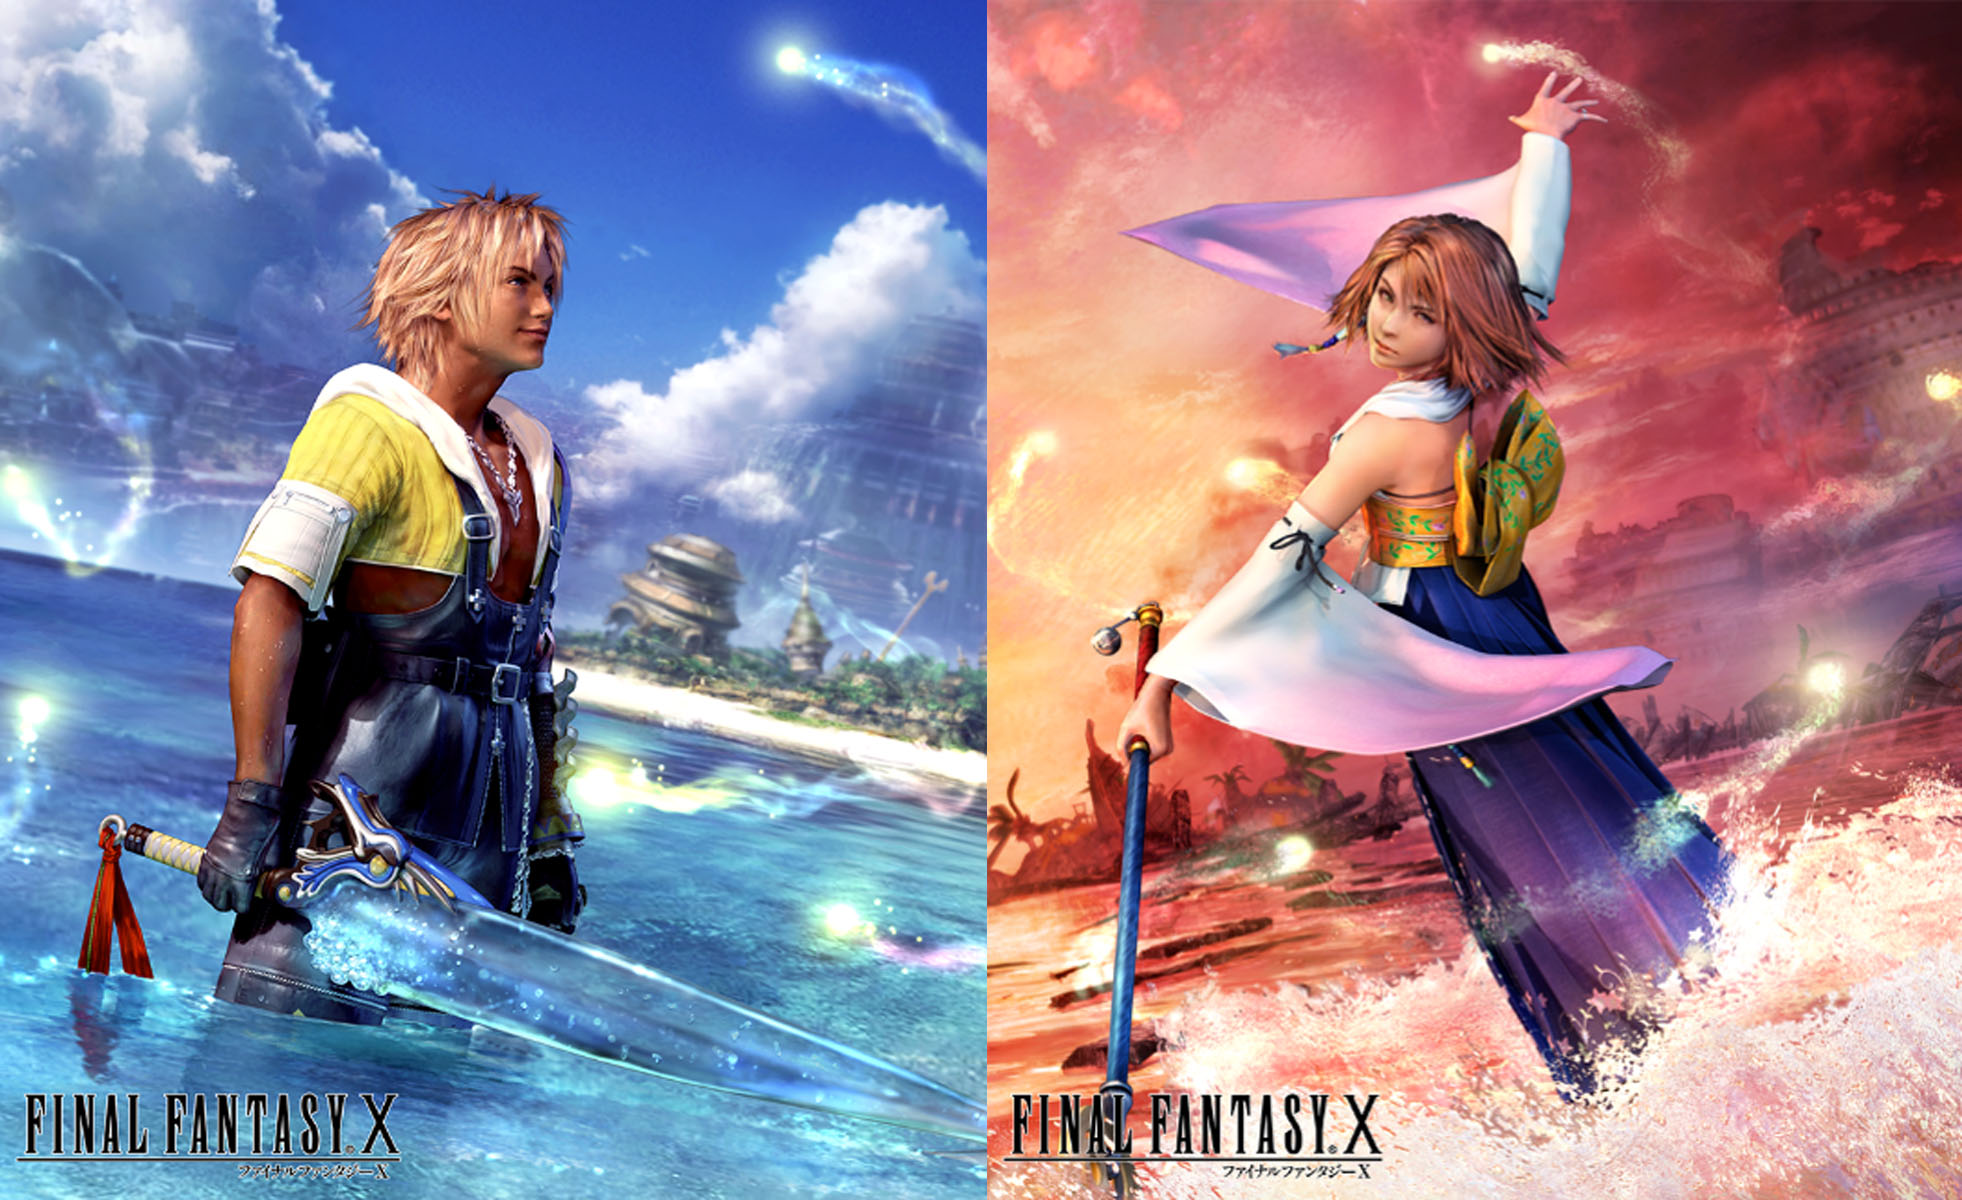 Mobius Final Fantasy Launches Final Fantasy VIII Collaboration For 3rd  Anniversary